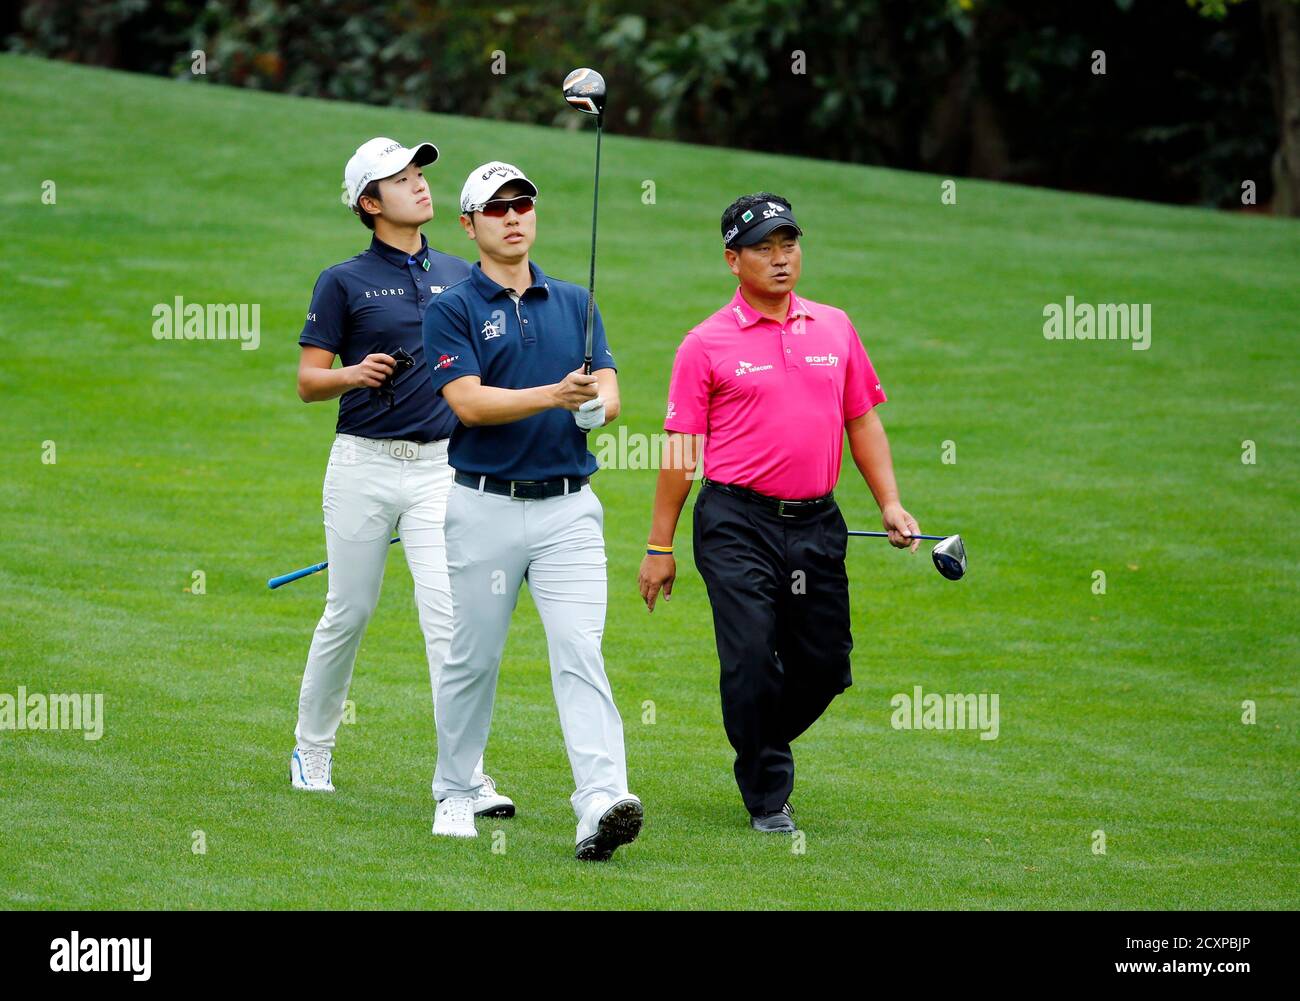 South Korean golfers Chang-woo Lee,(L), Sang Moon Bae, and K.J. Choi (R)  walk up the 11th fairway during a practice round ahead of the Masters golf  tournament at the Augusta National Golf